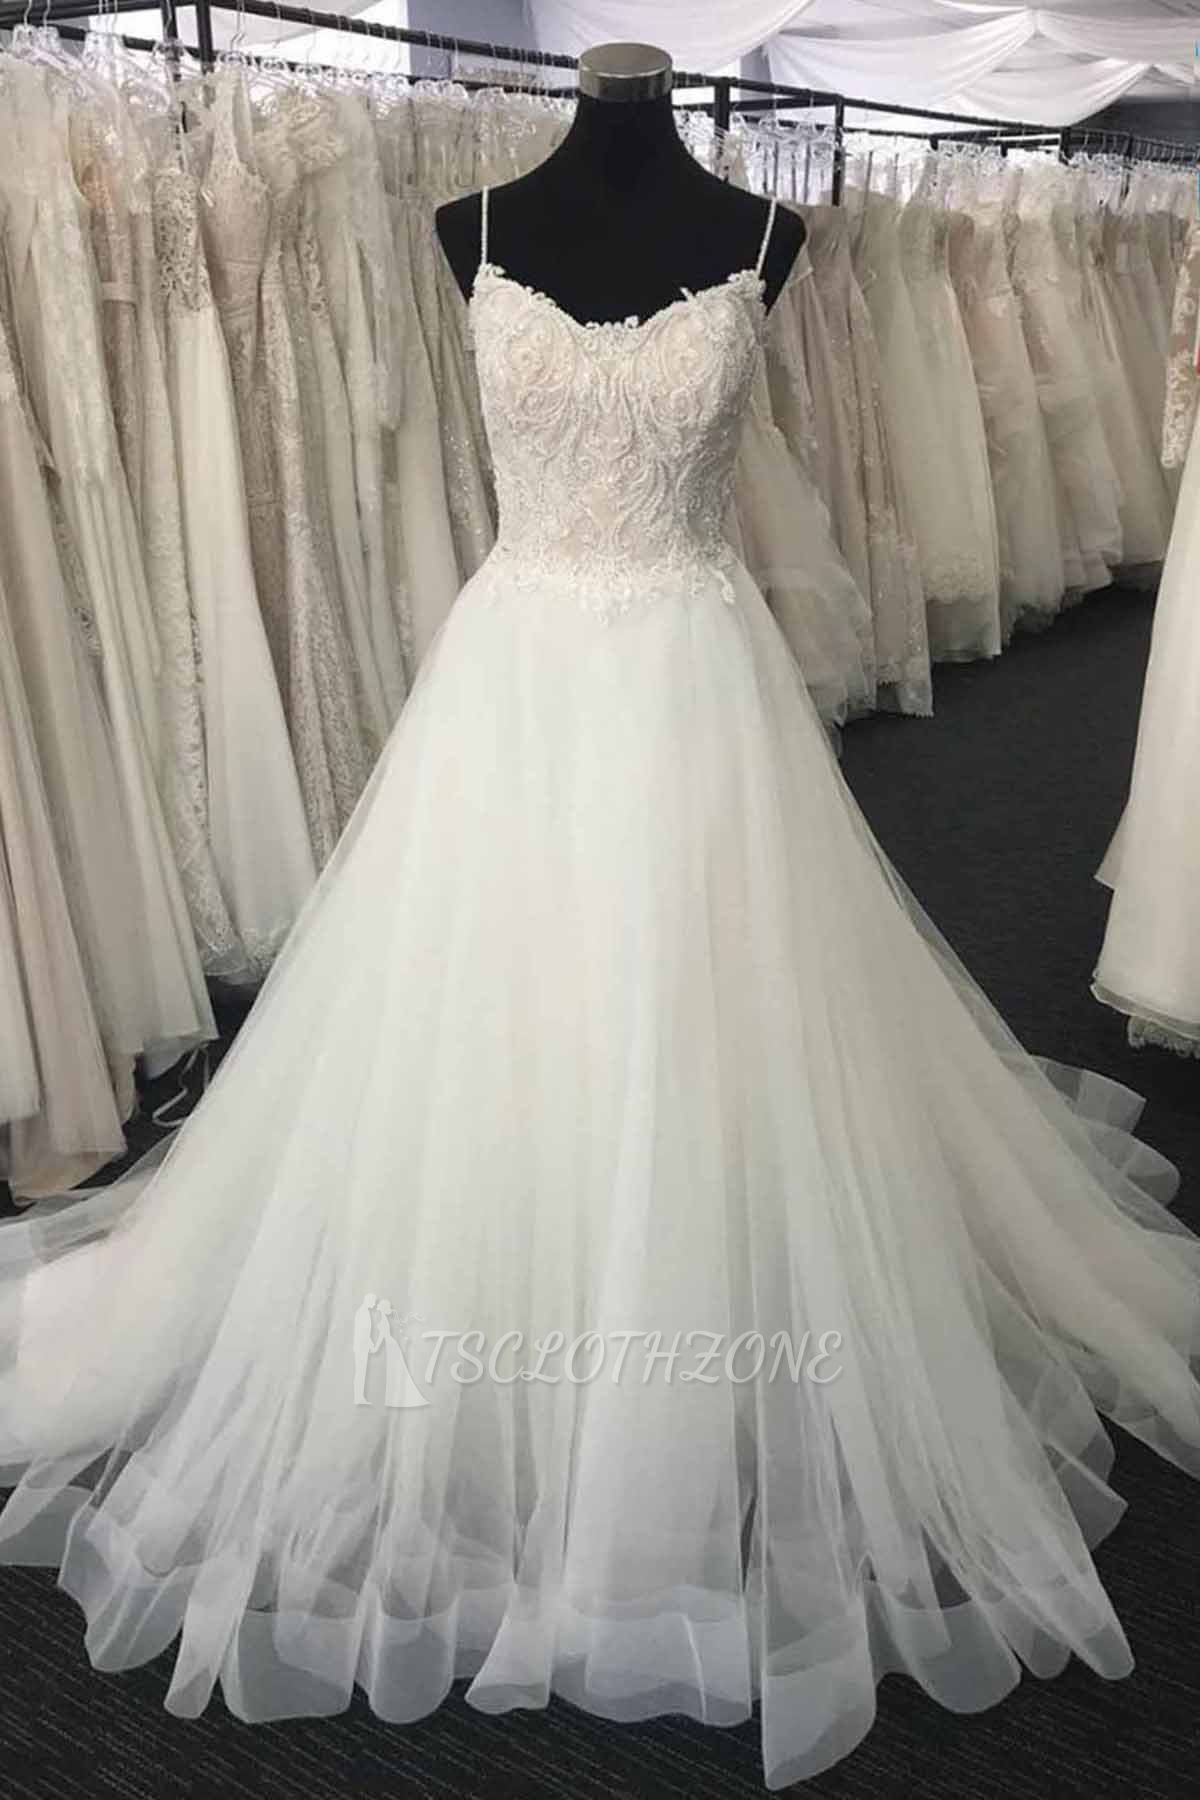 TsClothzone Gorgeous Sweetheart White Lace Wedding Dress Appliques Long Bridal Gowns On Sale